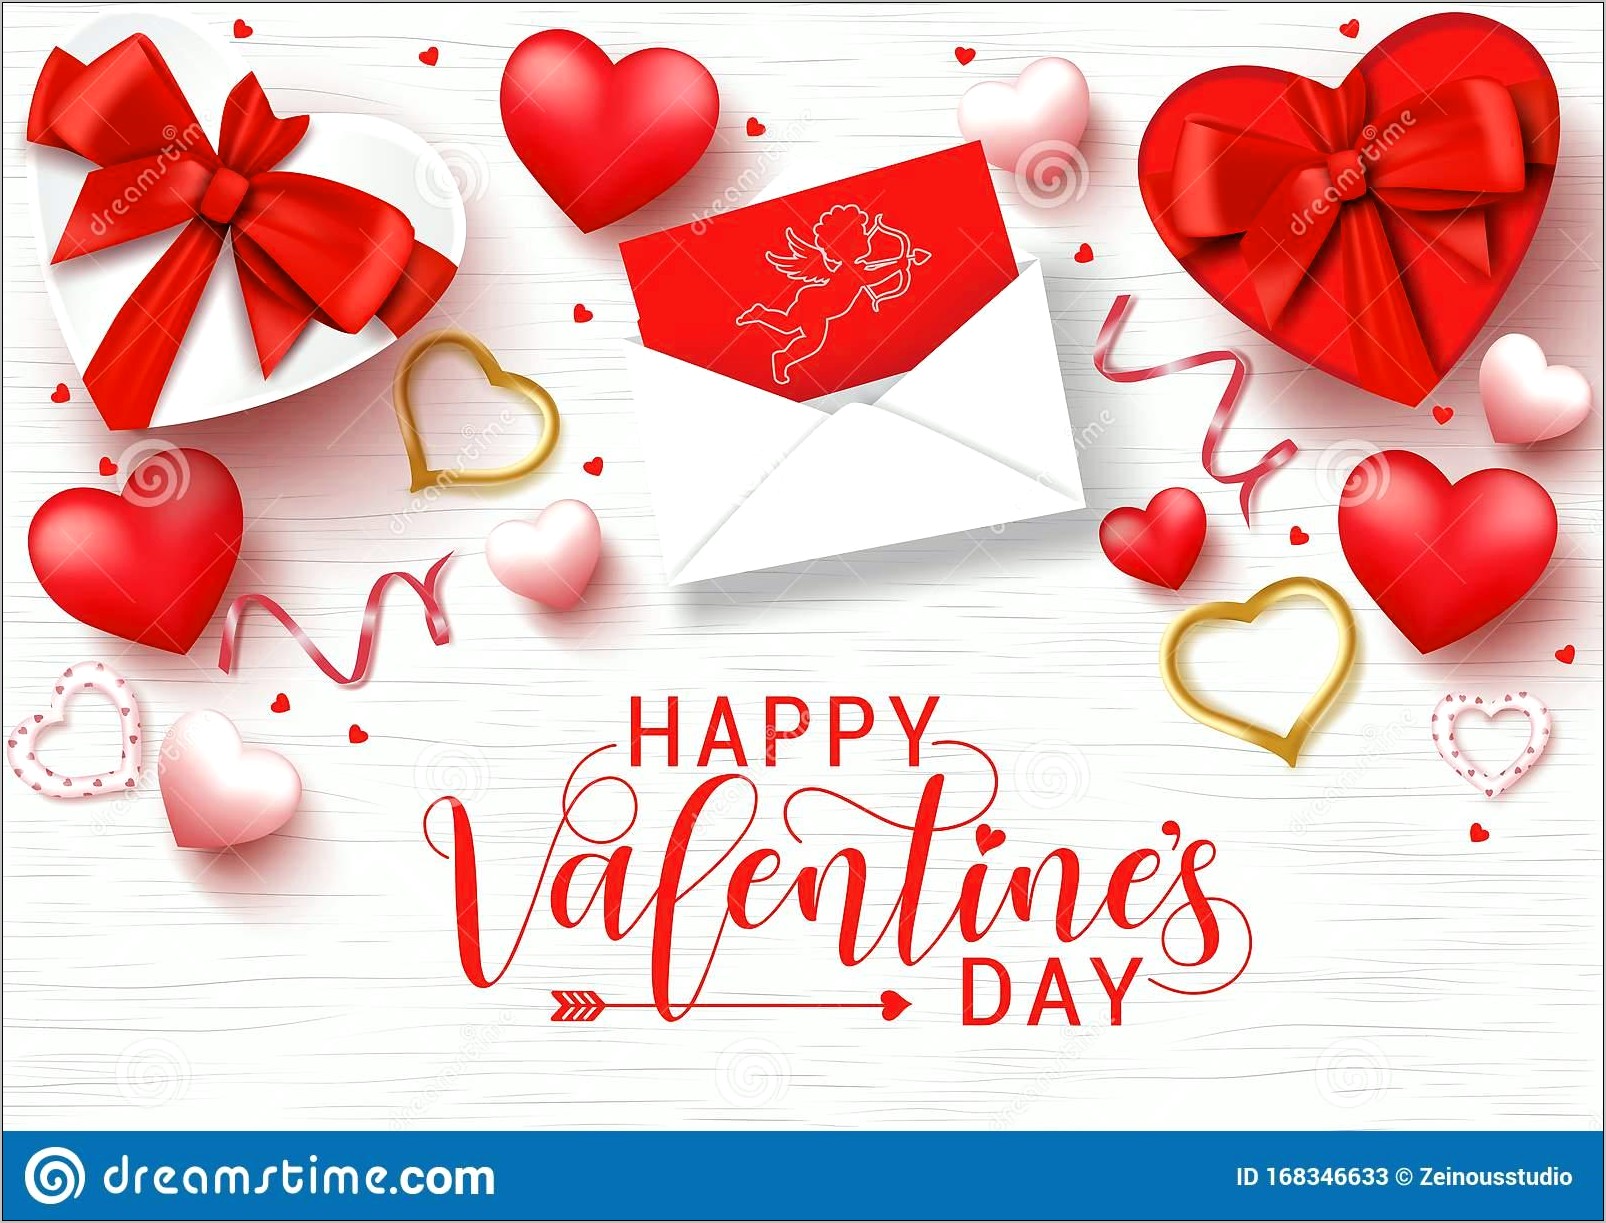 free-valentine-s-day-letter-templates-resume-example-gallery